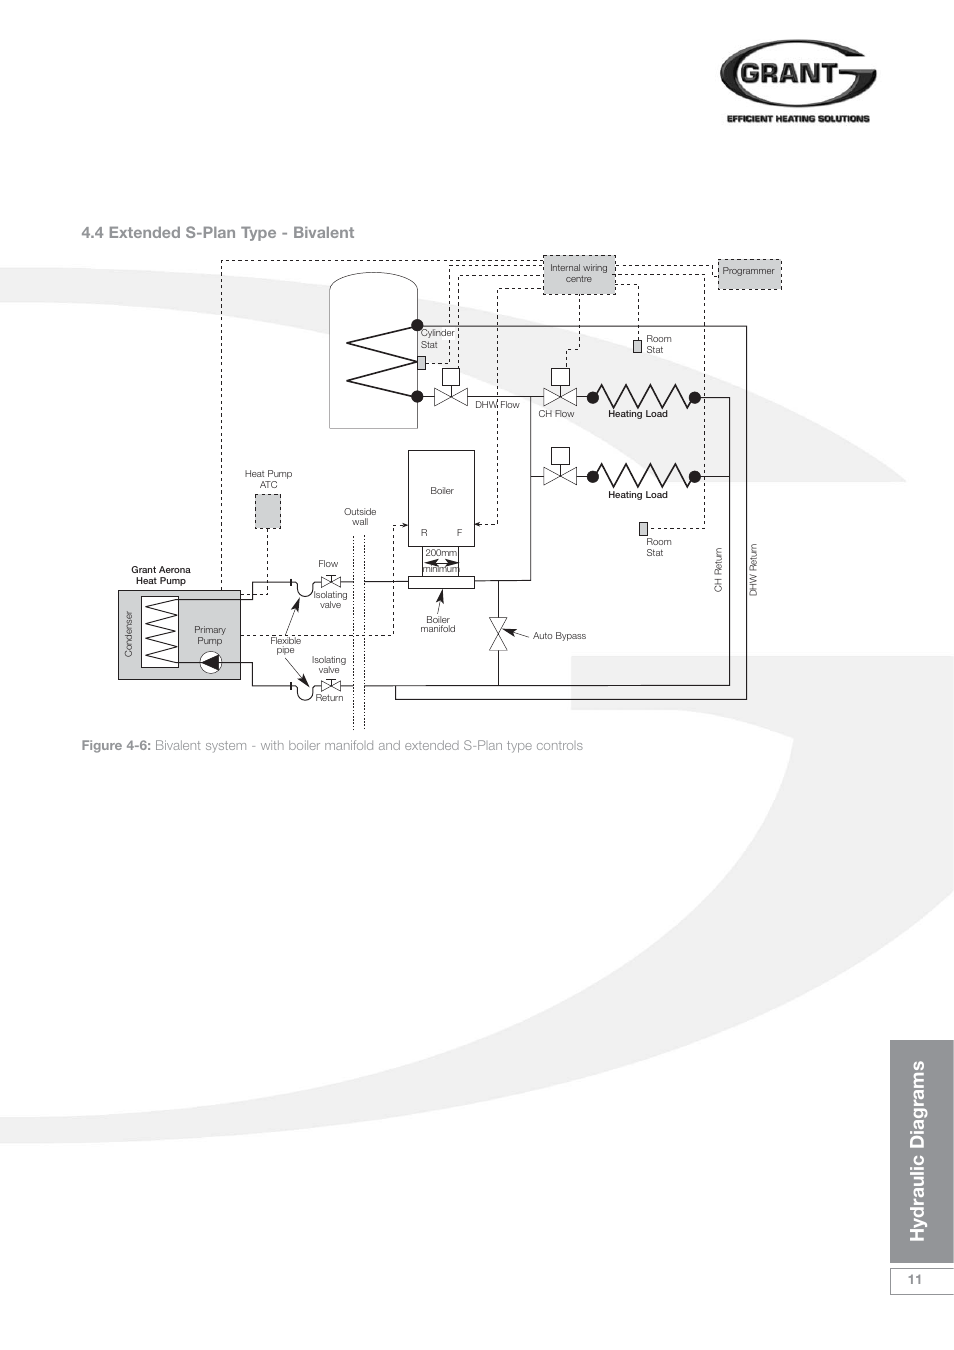 Hydraulic diagrams, 4 extended s-plan type - bivalent | Grant Products HPAW155 User Manual | Page 15 / 50